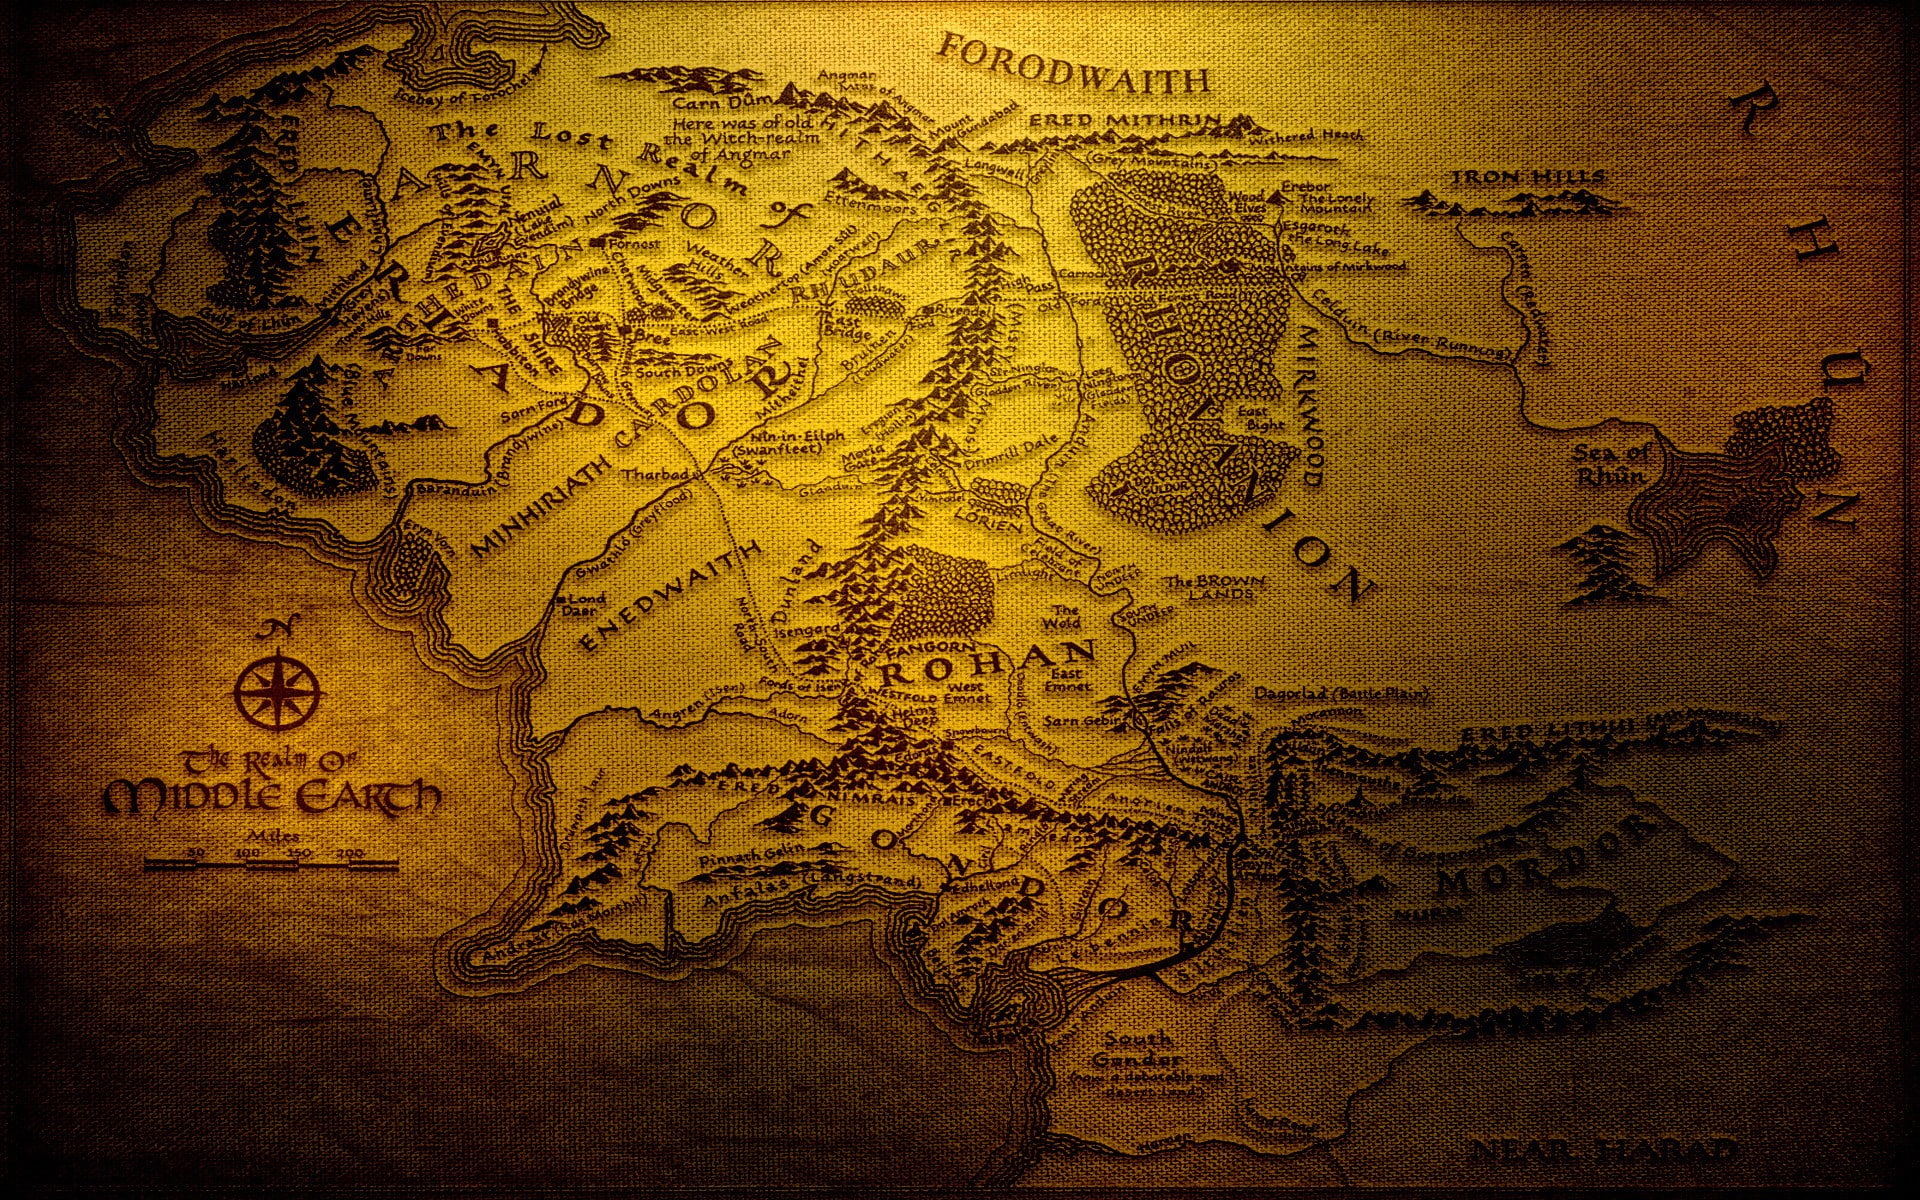 The Hobbit, Middle-earth, The Lord of the Rings, map, J. R. R. Tolkien